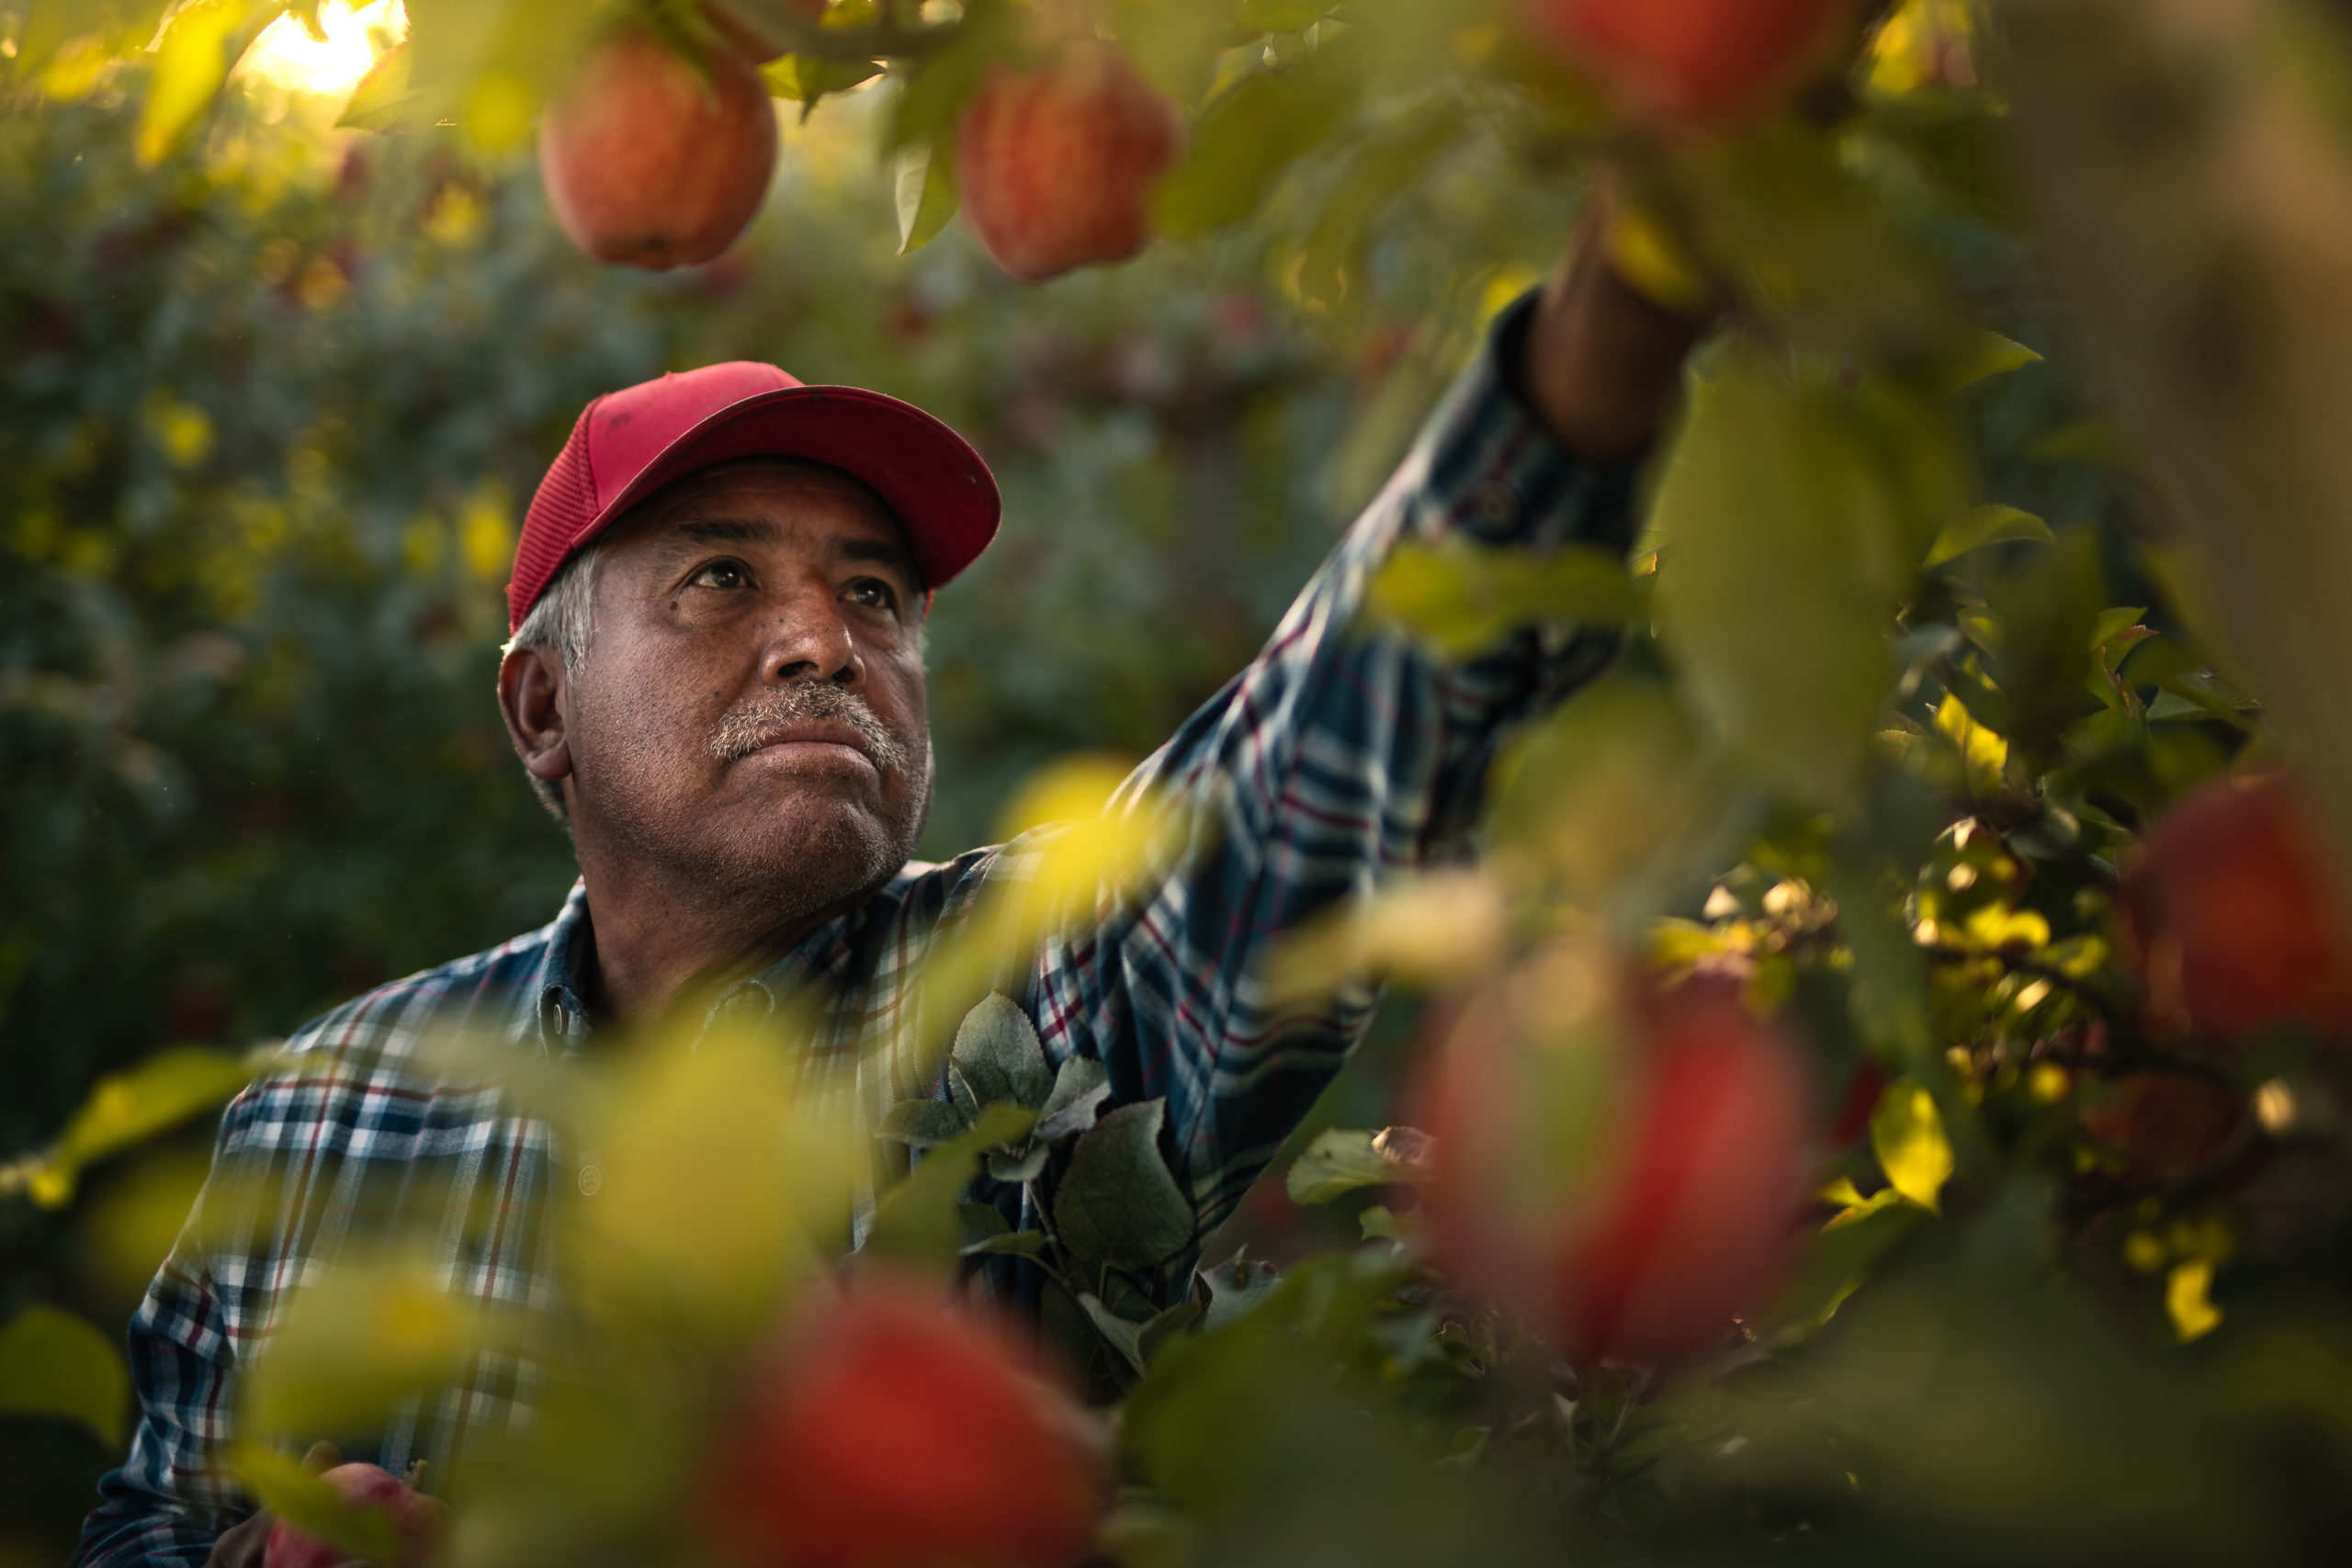 A migrant farm worker picks apples at an orchard in Yakima, Washington